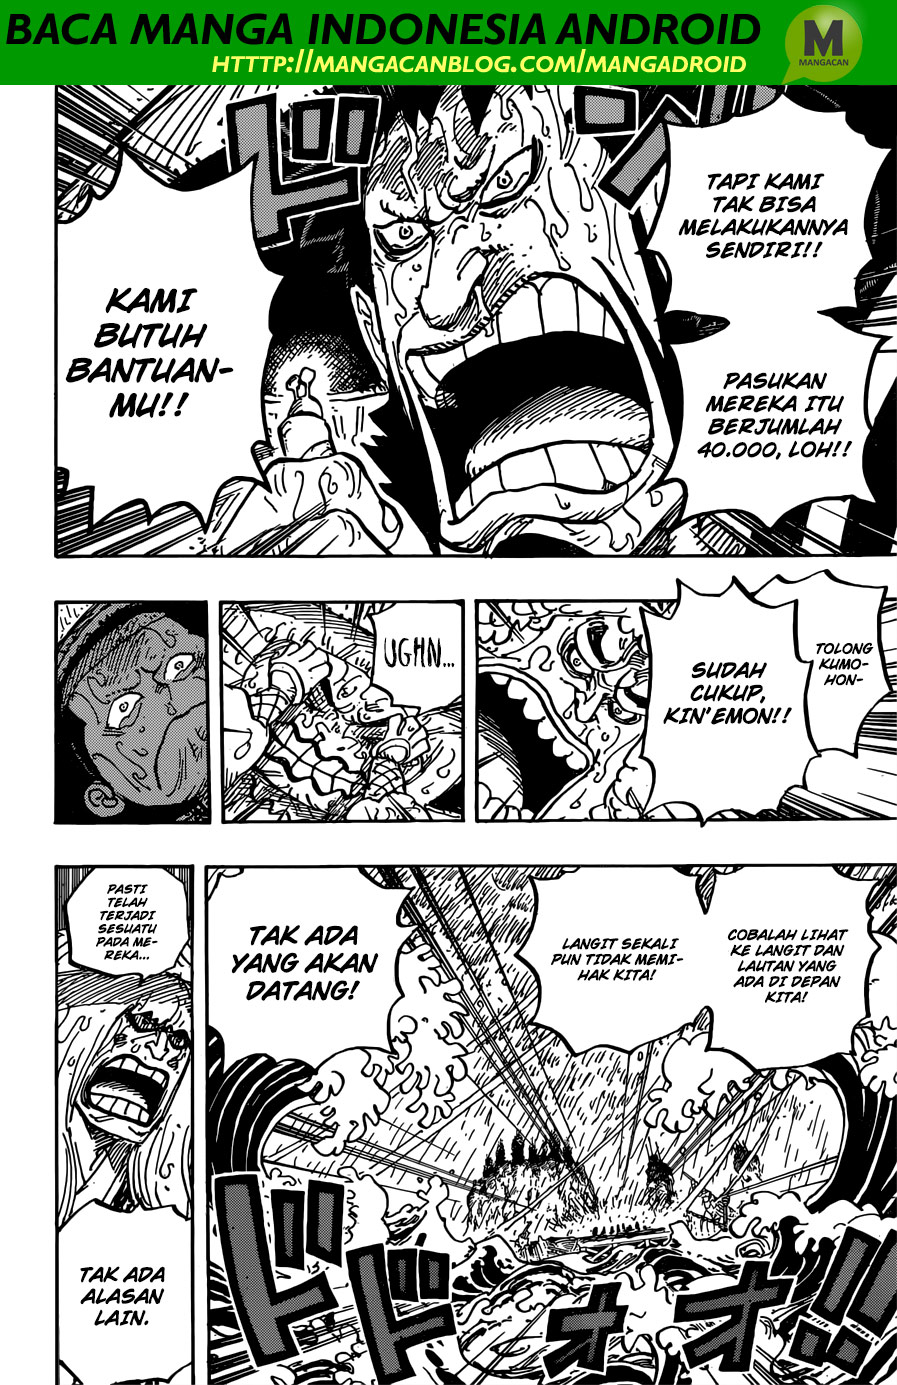 One Piece Chapter 958